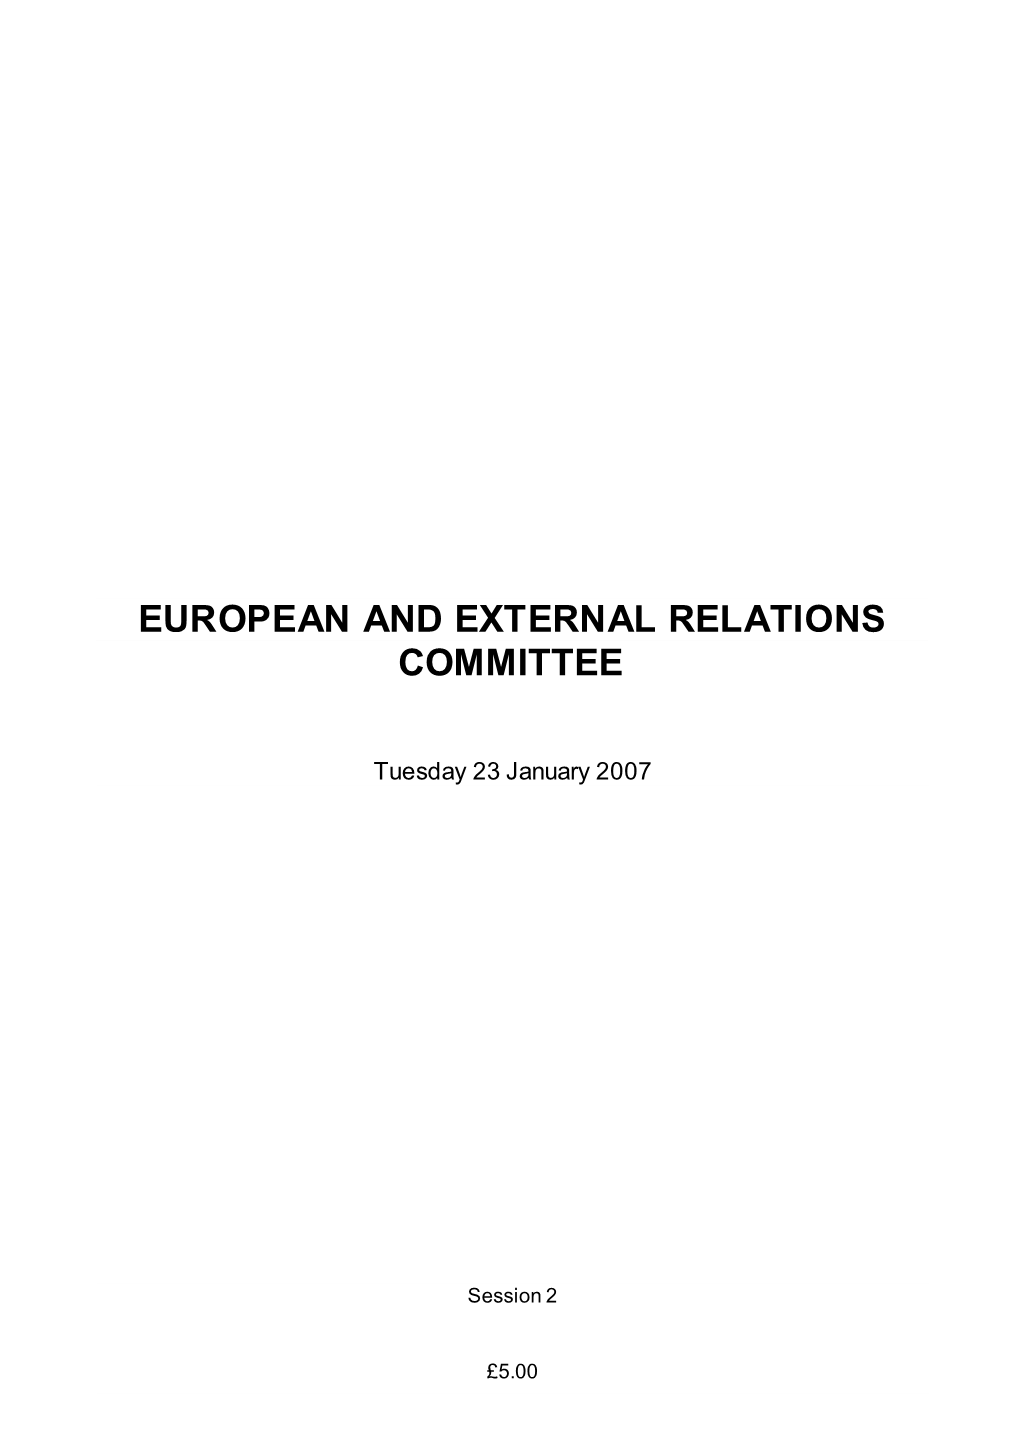 European and External Relations Committee